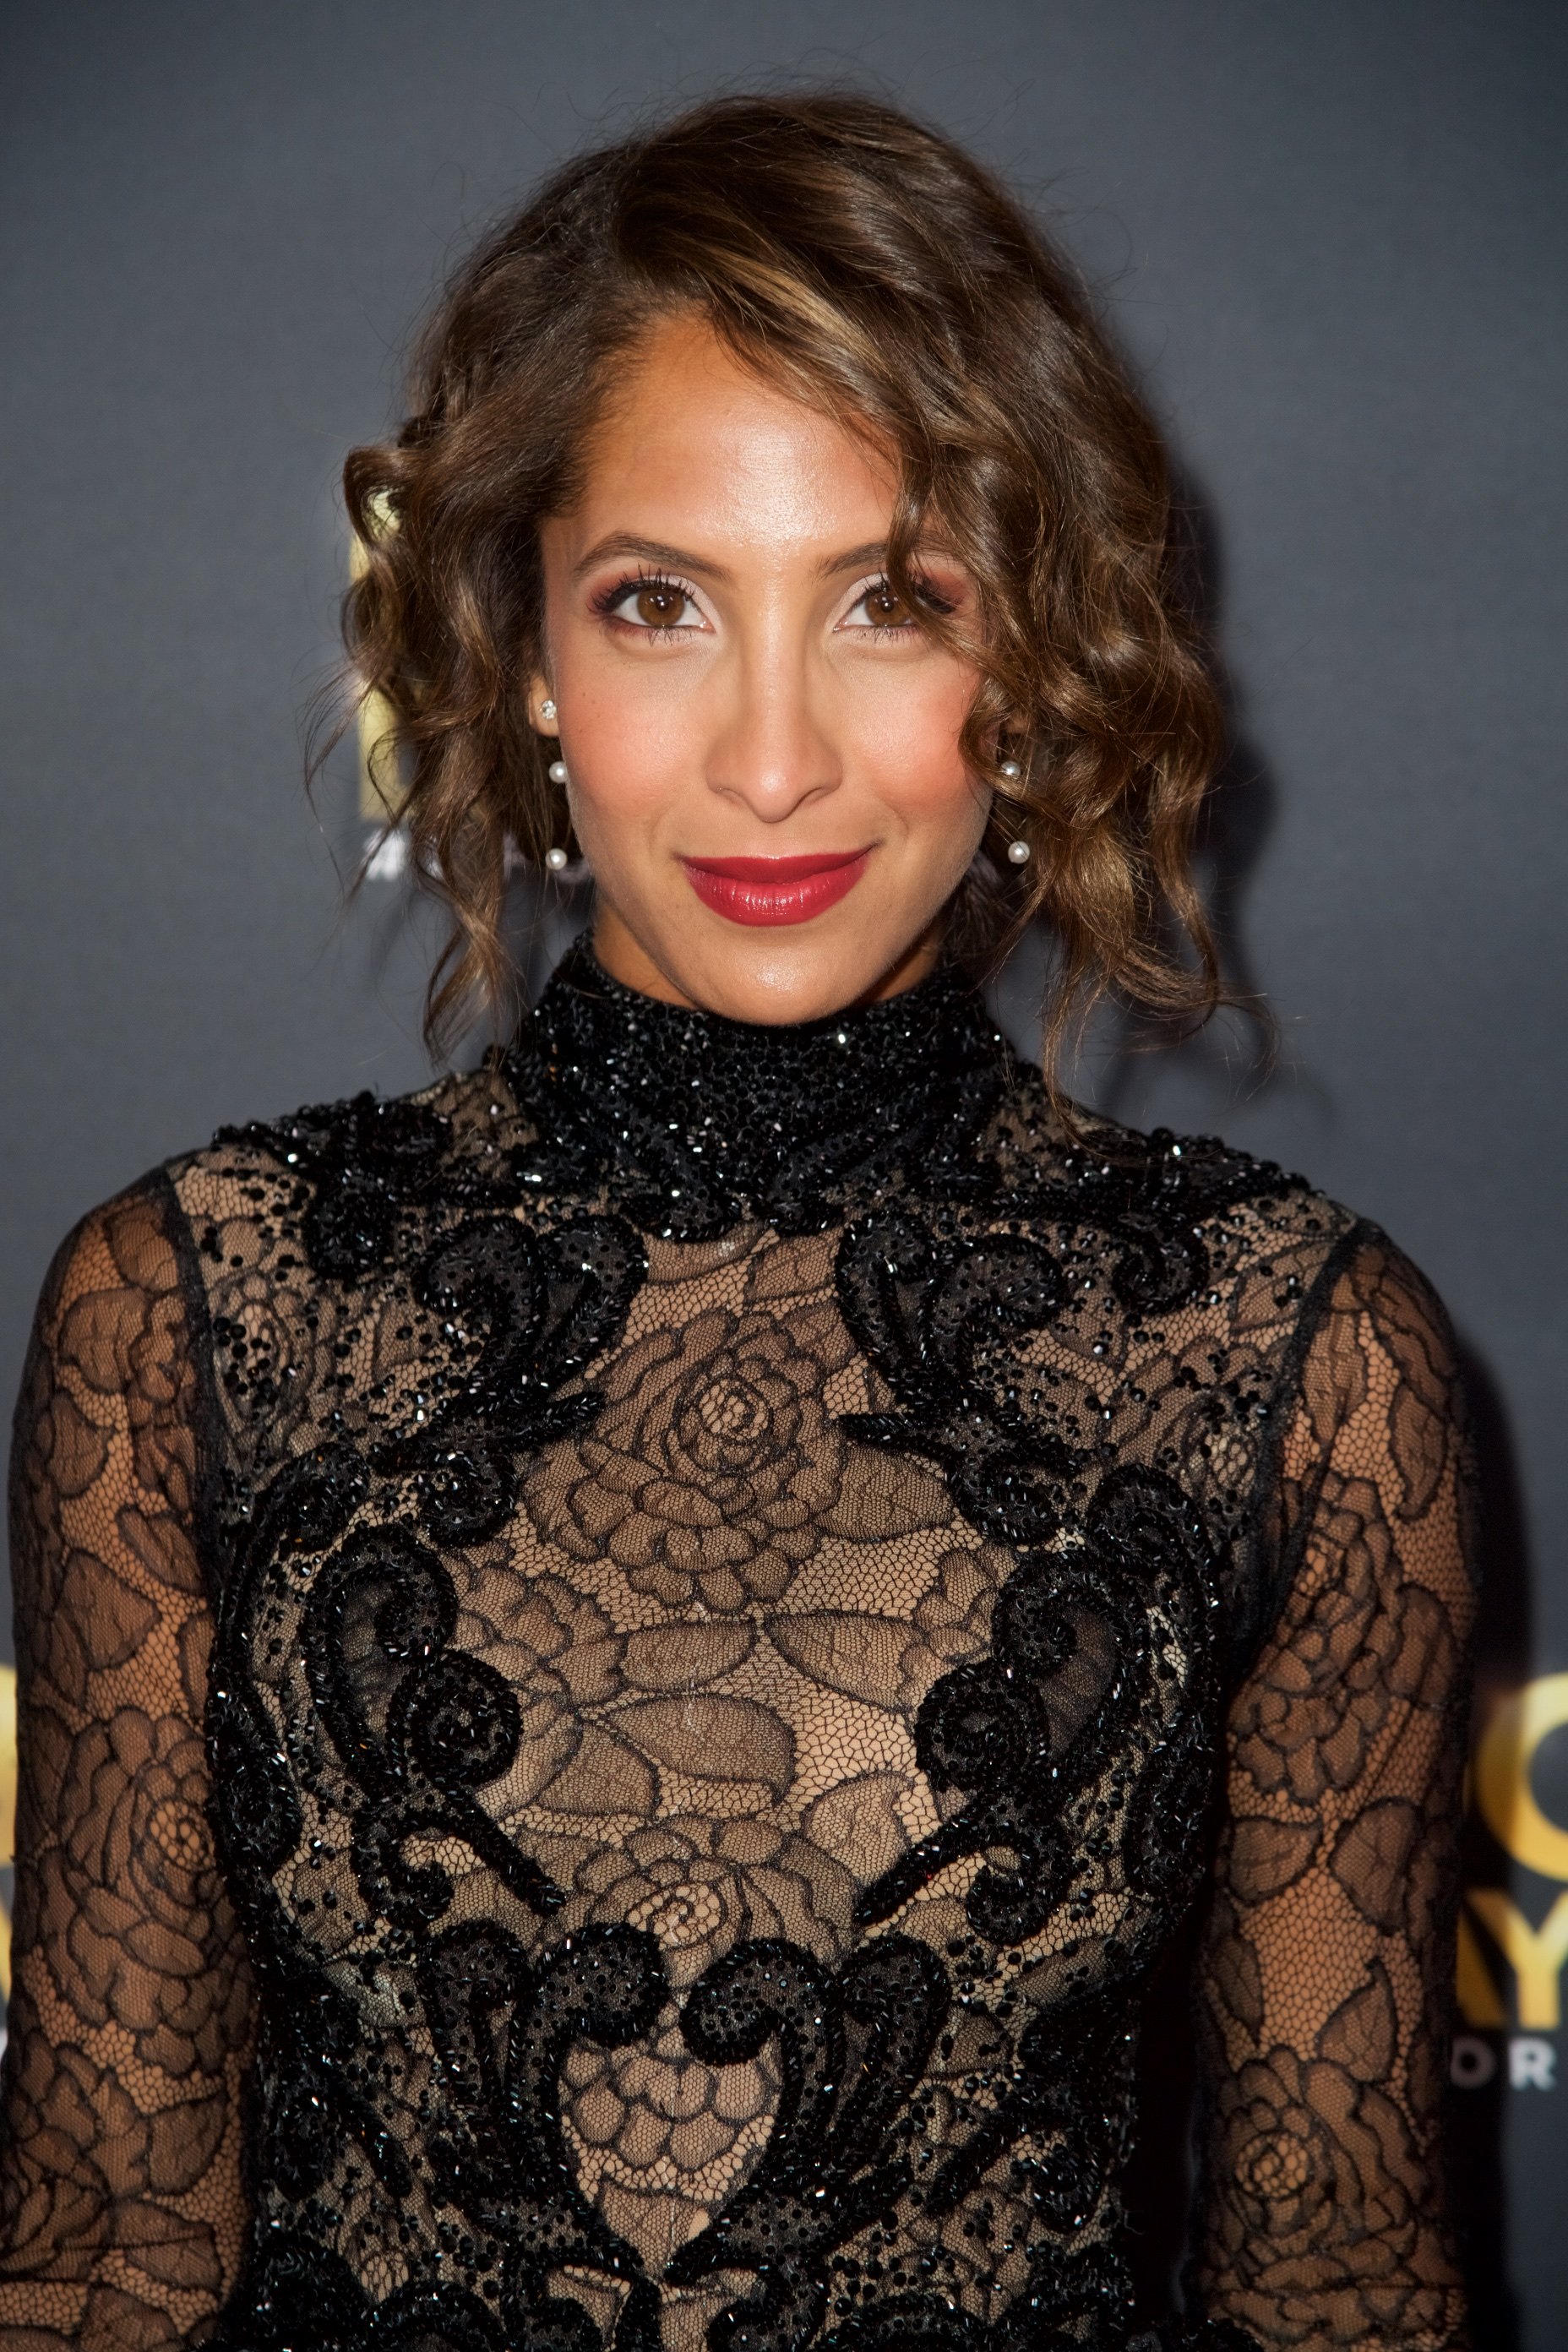 'The Young and the Restless' star Christel Khalil wearing a black dress during a red carpet appearance.